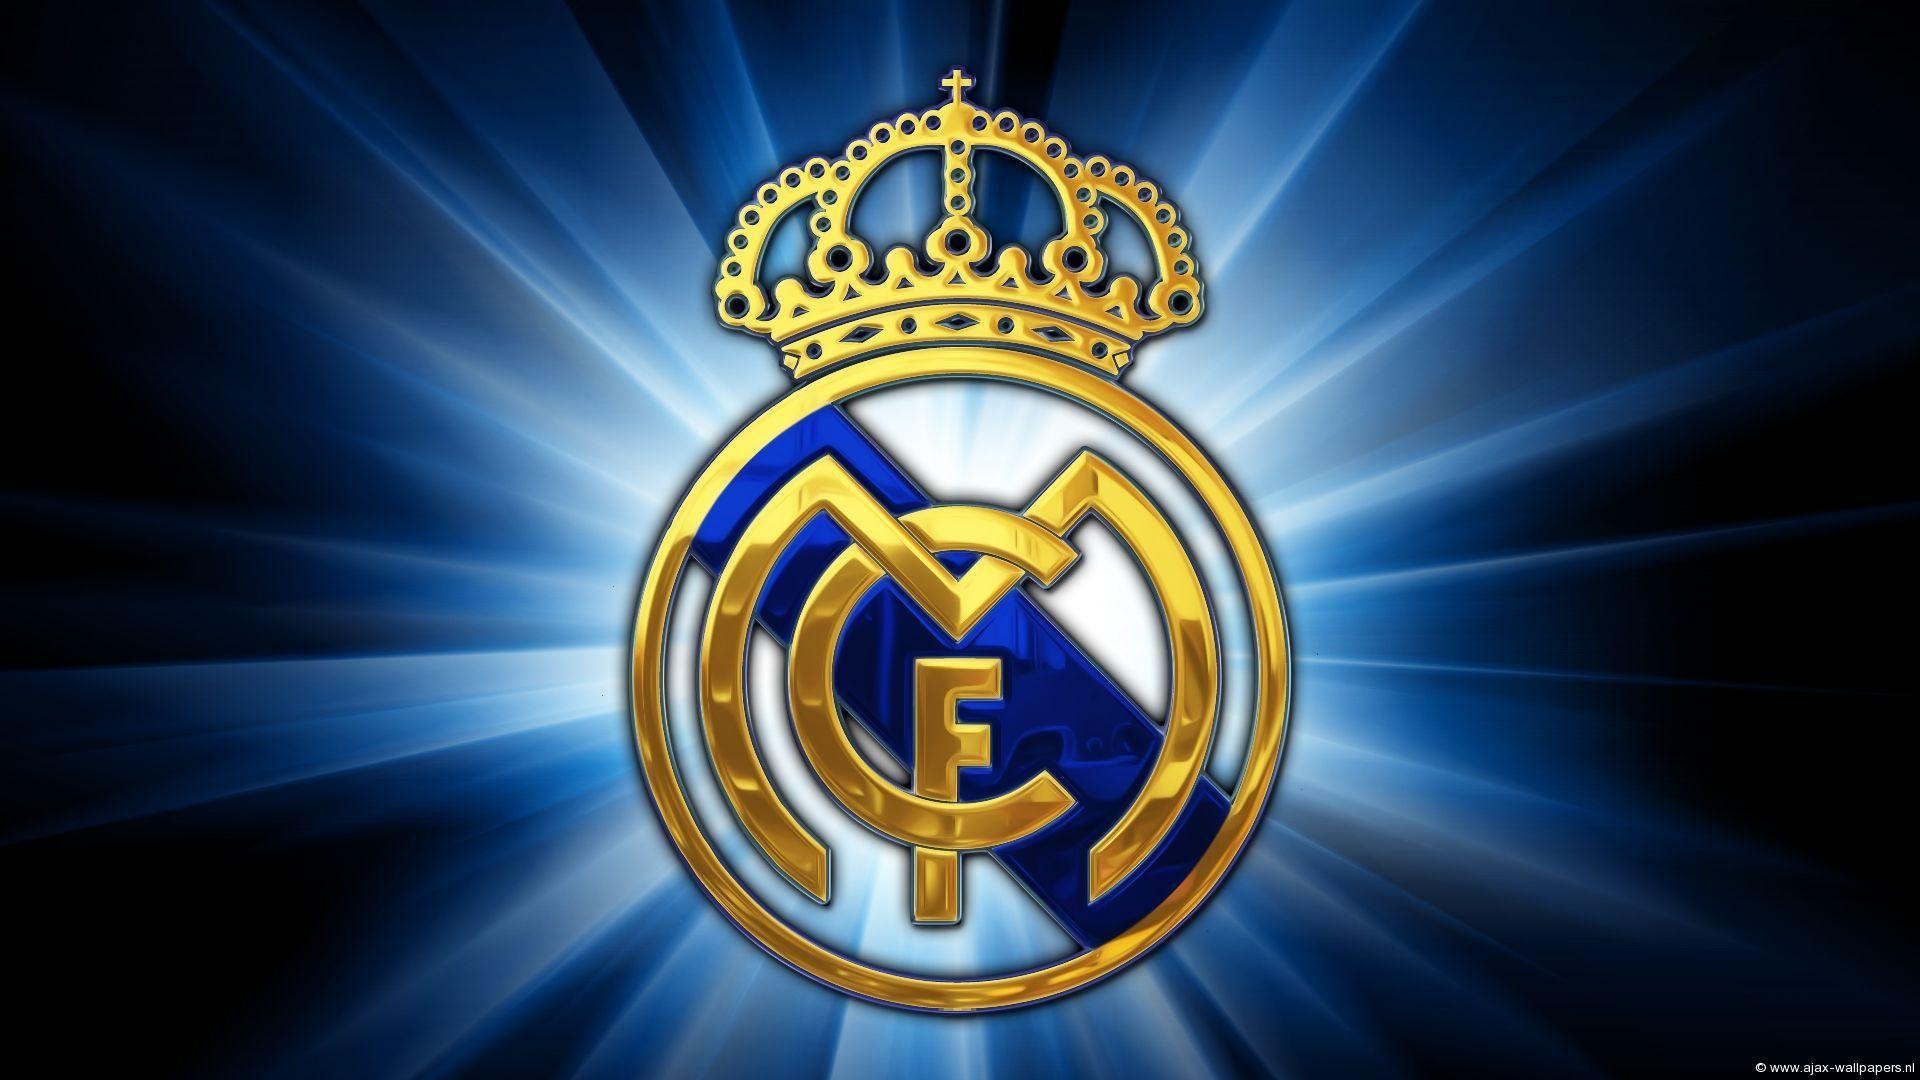 Cool Wallpaper Real Madrid image picture. Free Download